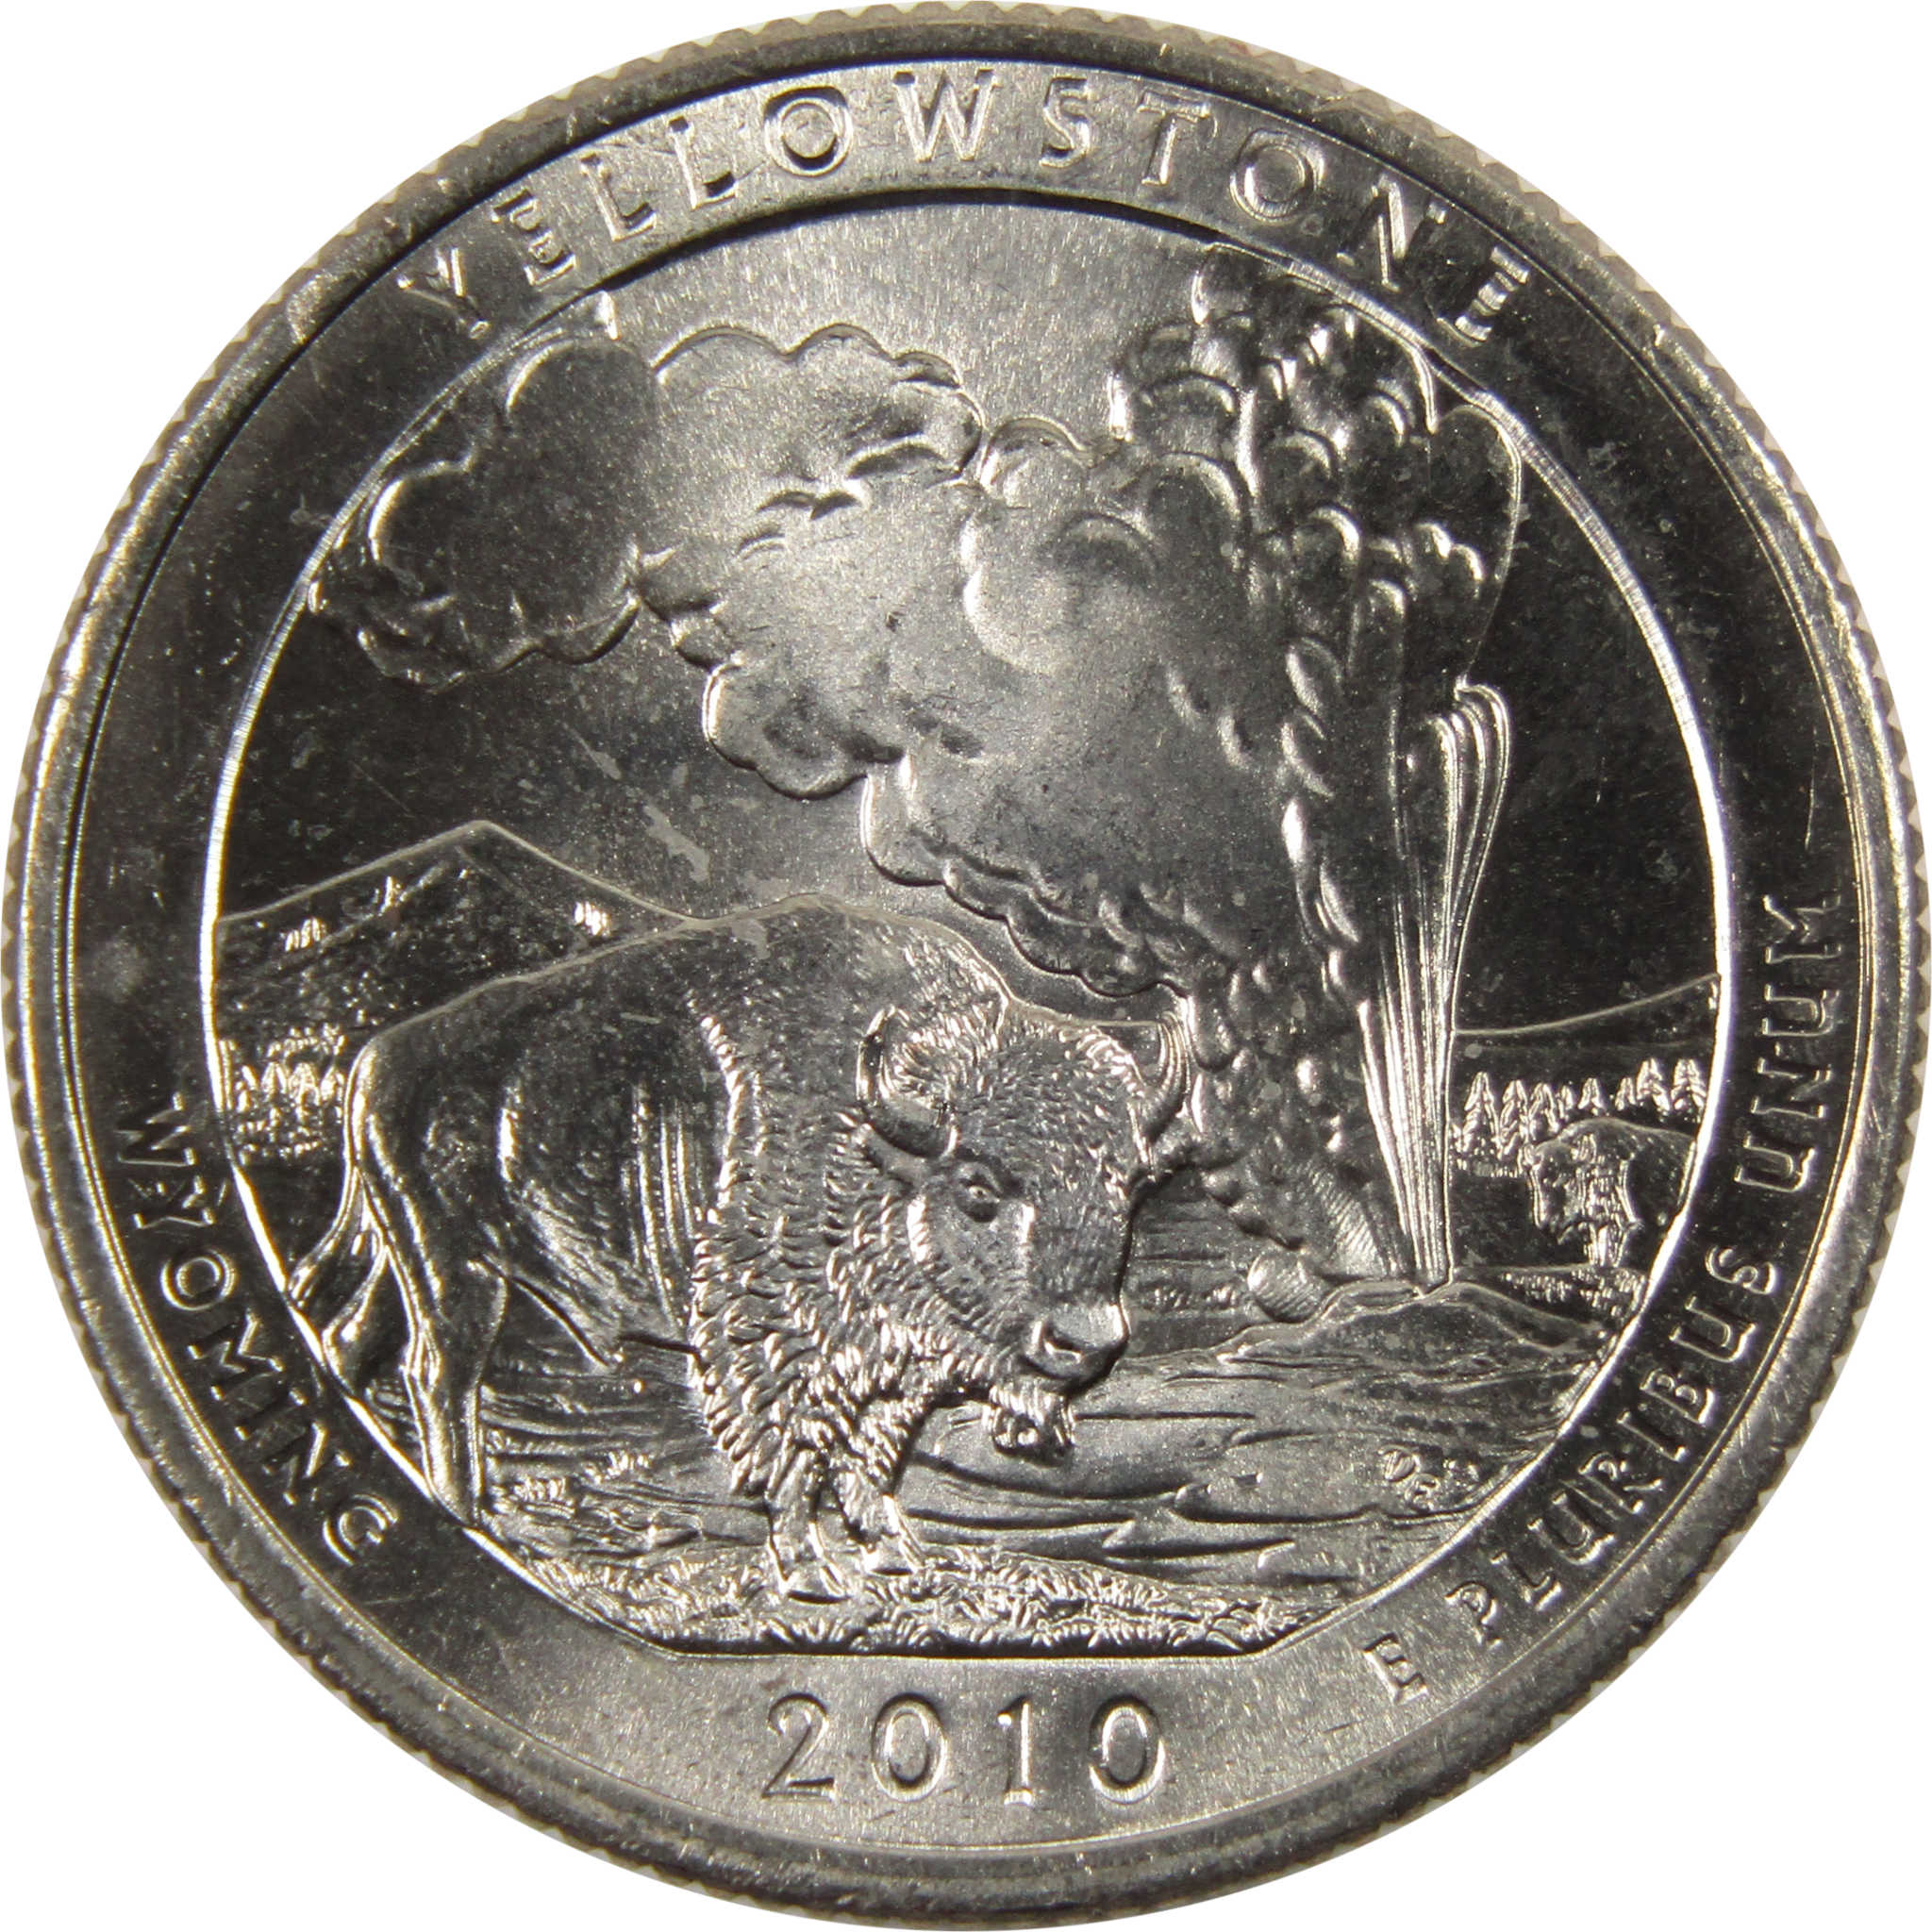 2010 P Yellowstone National Park Quarter BU Uncirculated Clad 25c Coin